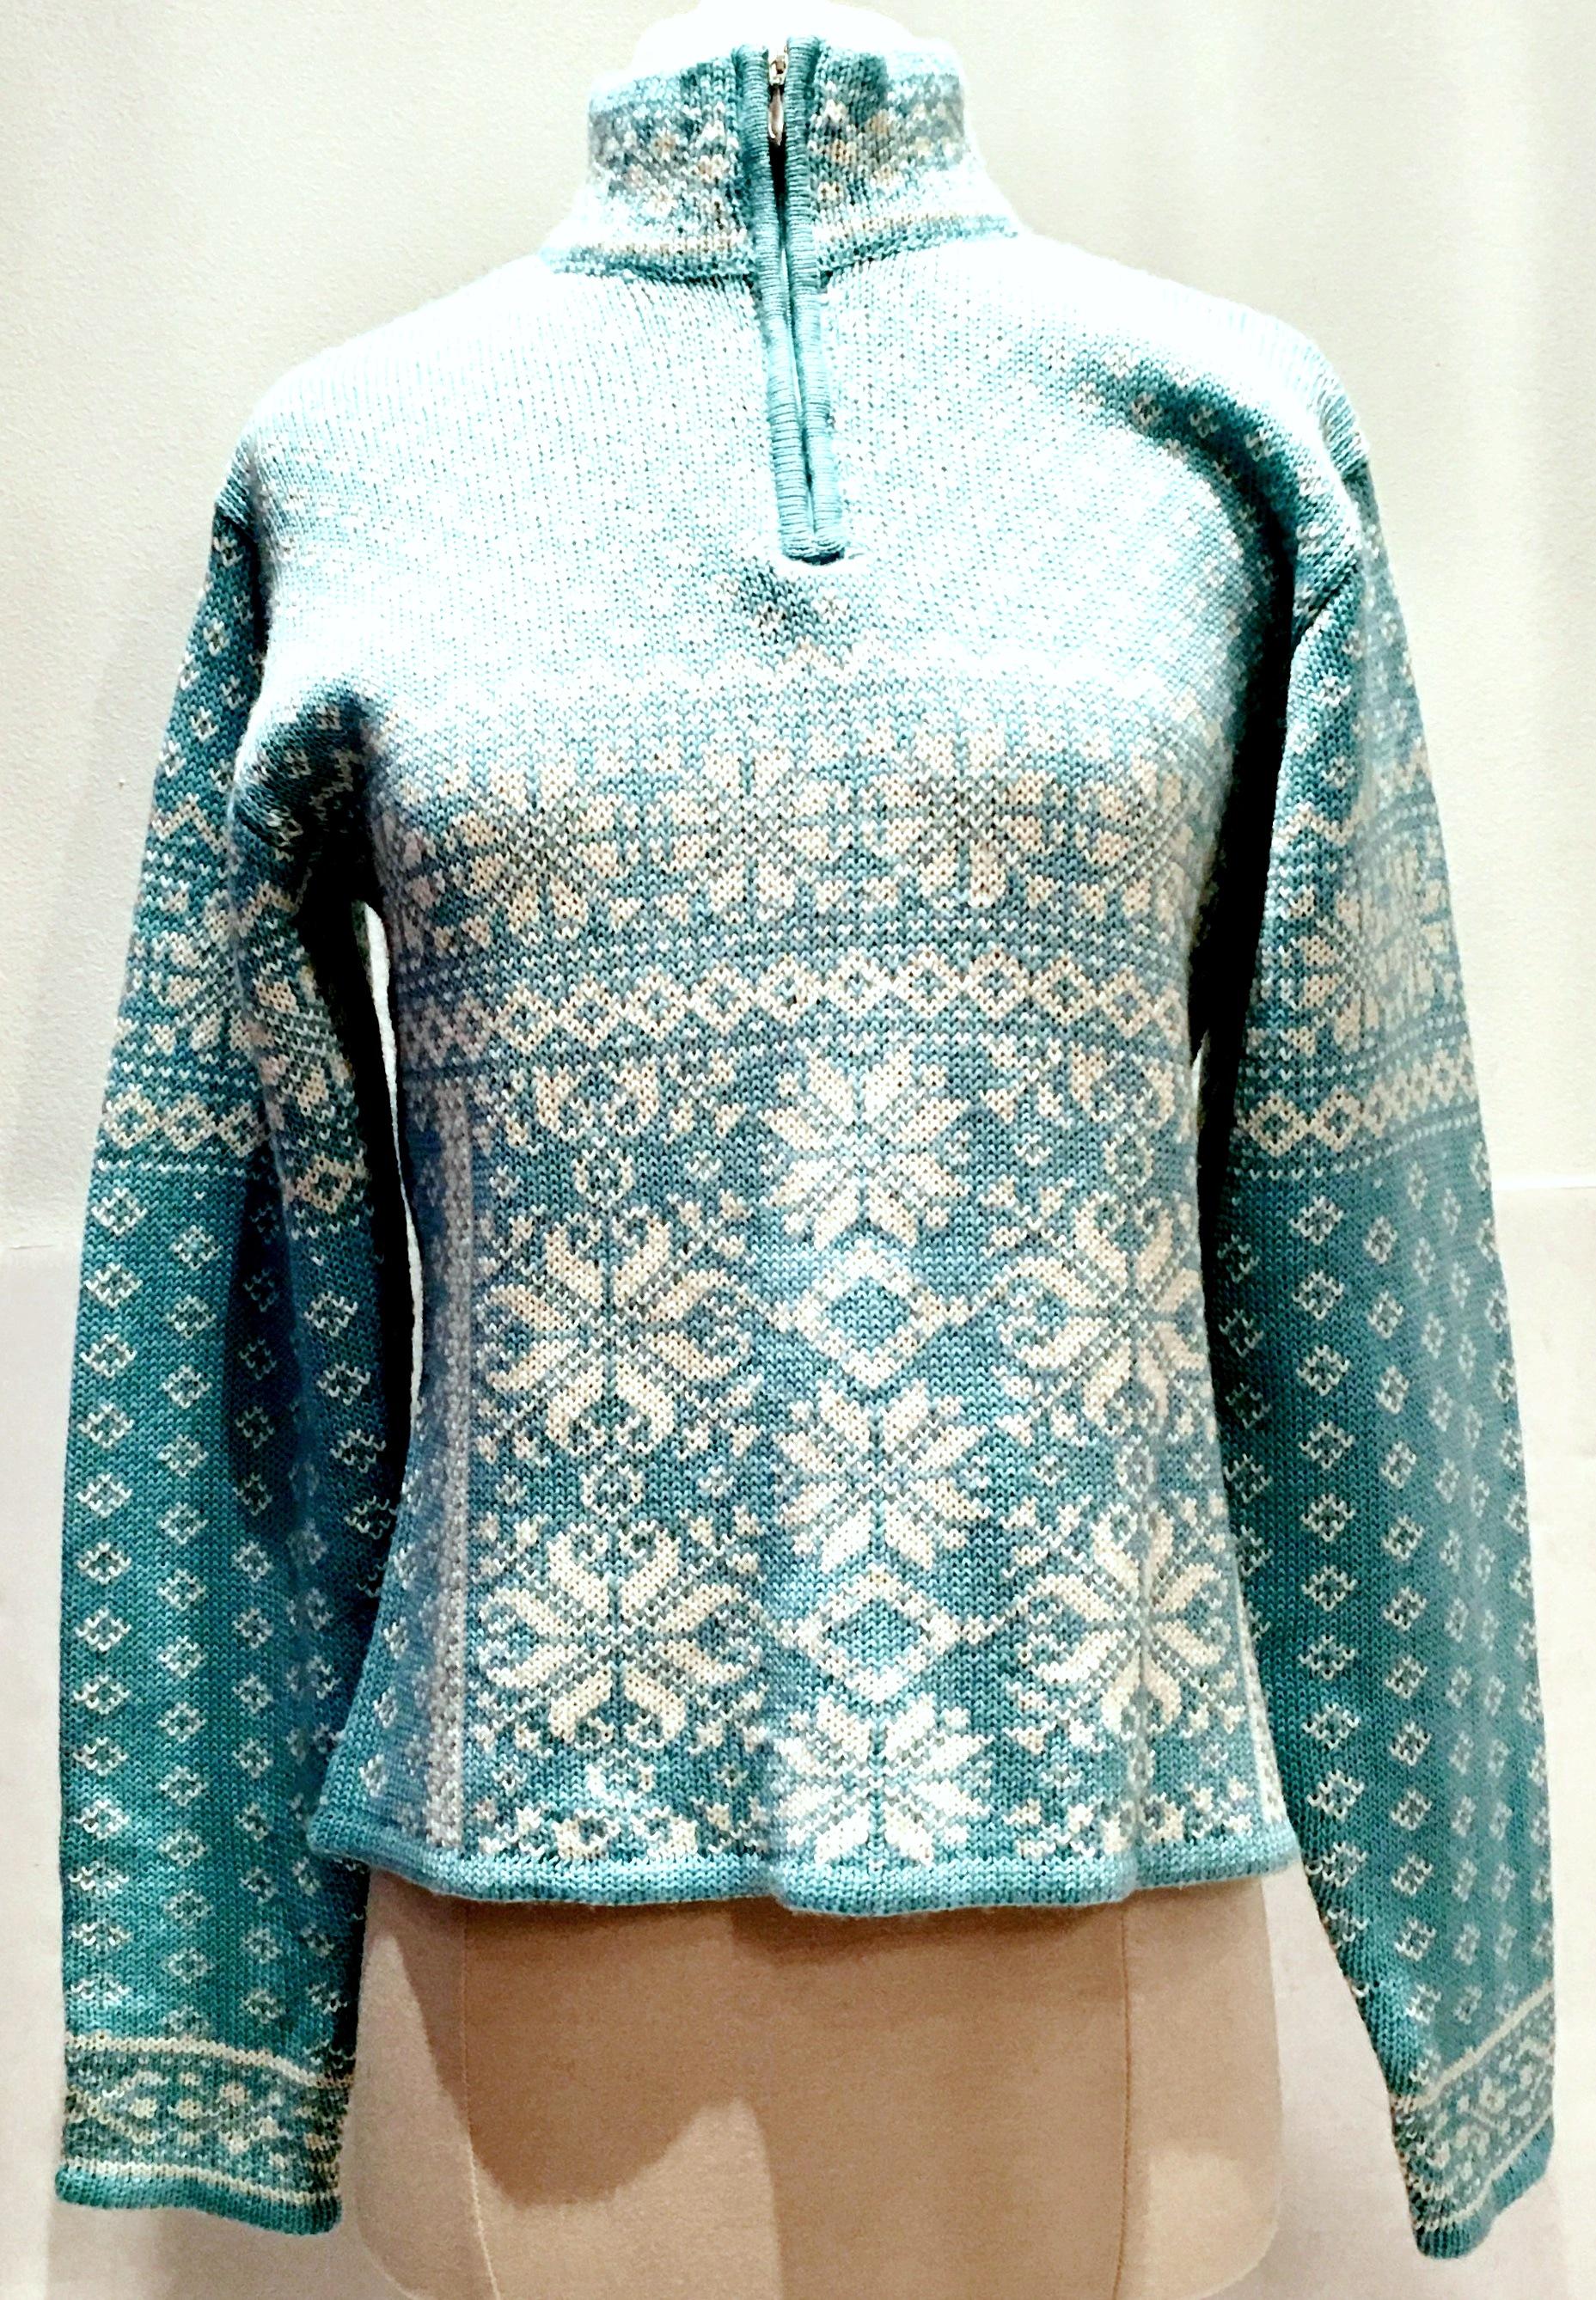 Contemporary & New Vibrant Baby Blue & White Snowflake ski sweater by Obermeyer for Gorsuch. Made of soft wool and acrylic blend with a silver chrome front neck zipper. Marked a Ladies Medium. 
New, without tags, never worn